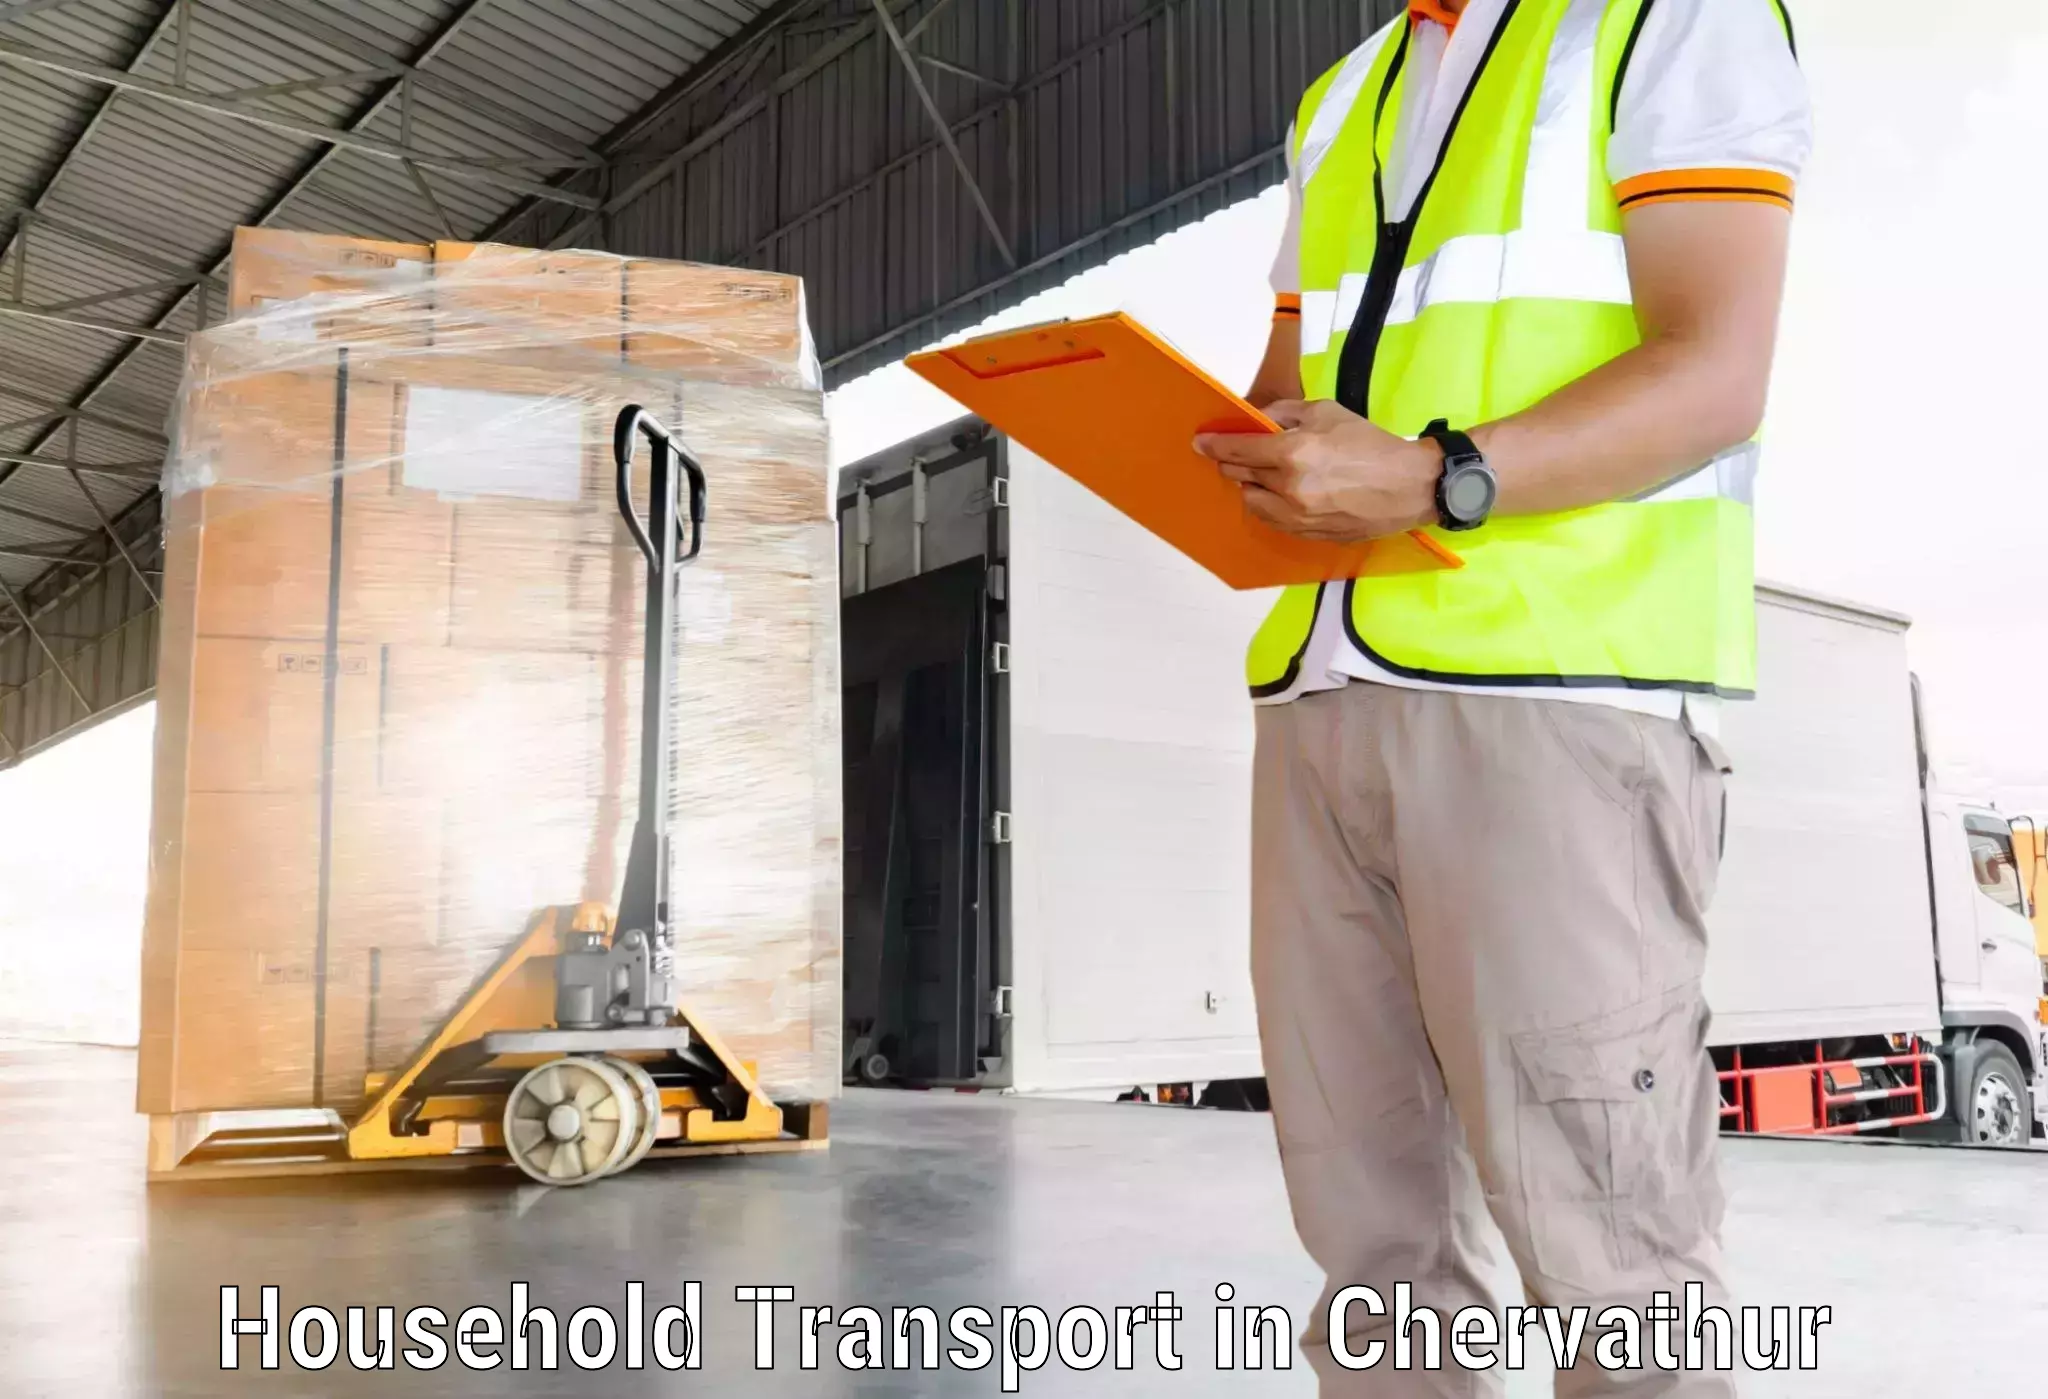 Furniture transport and logistics in Chervathur